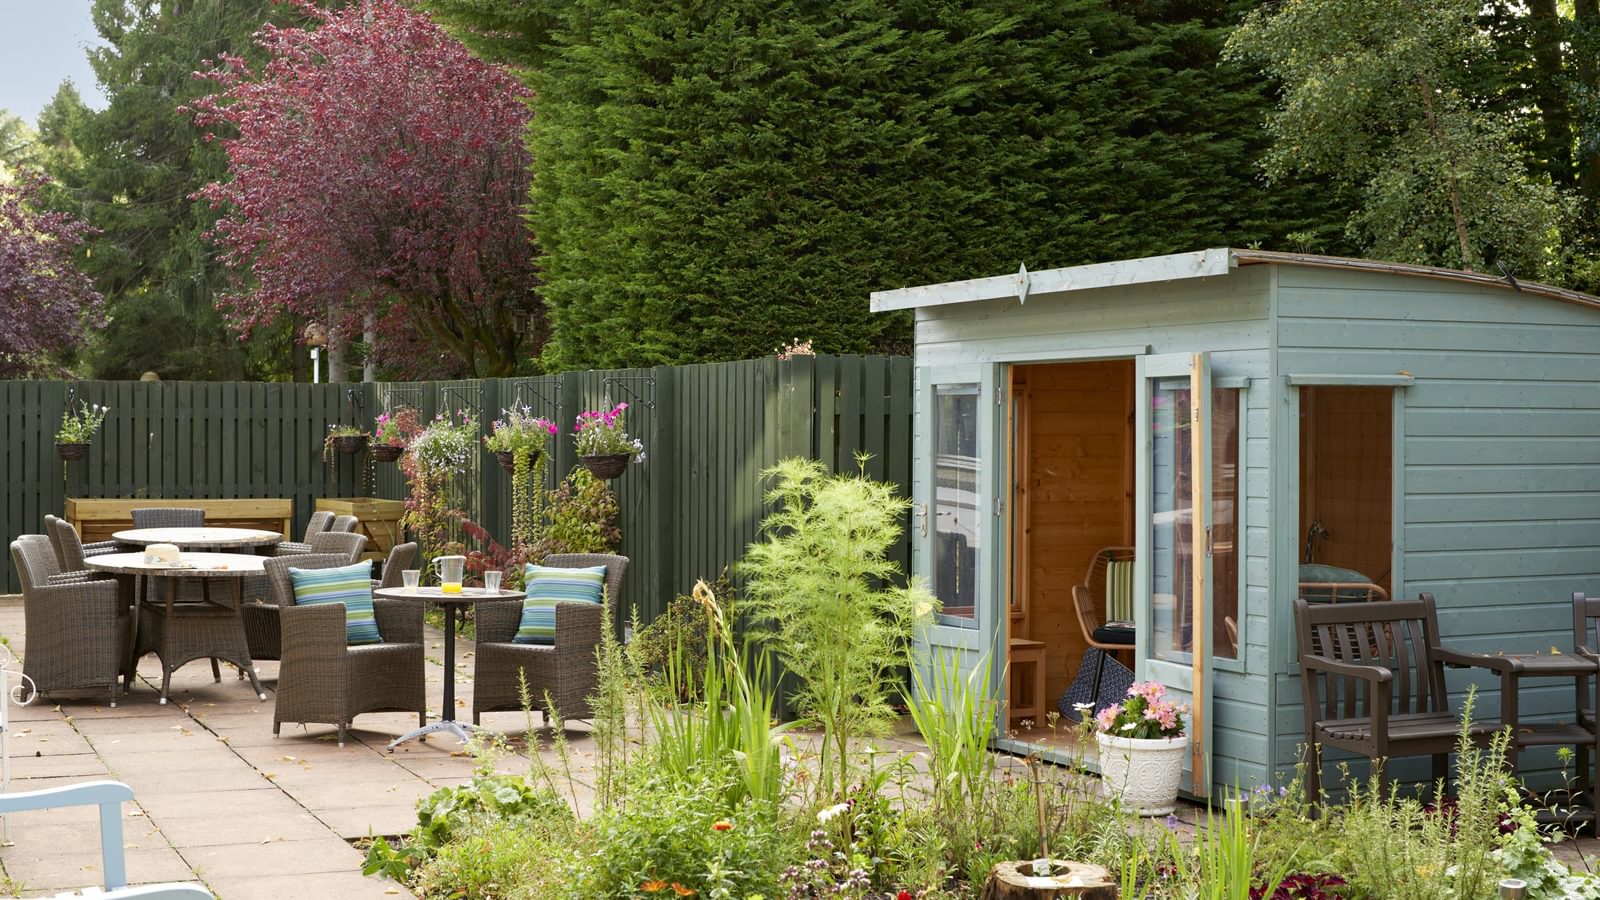 Hawkhill House garden area decorated with plants, seating and a turquoise-coloured shed